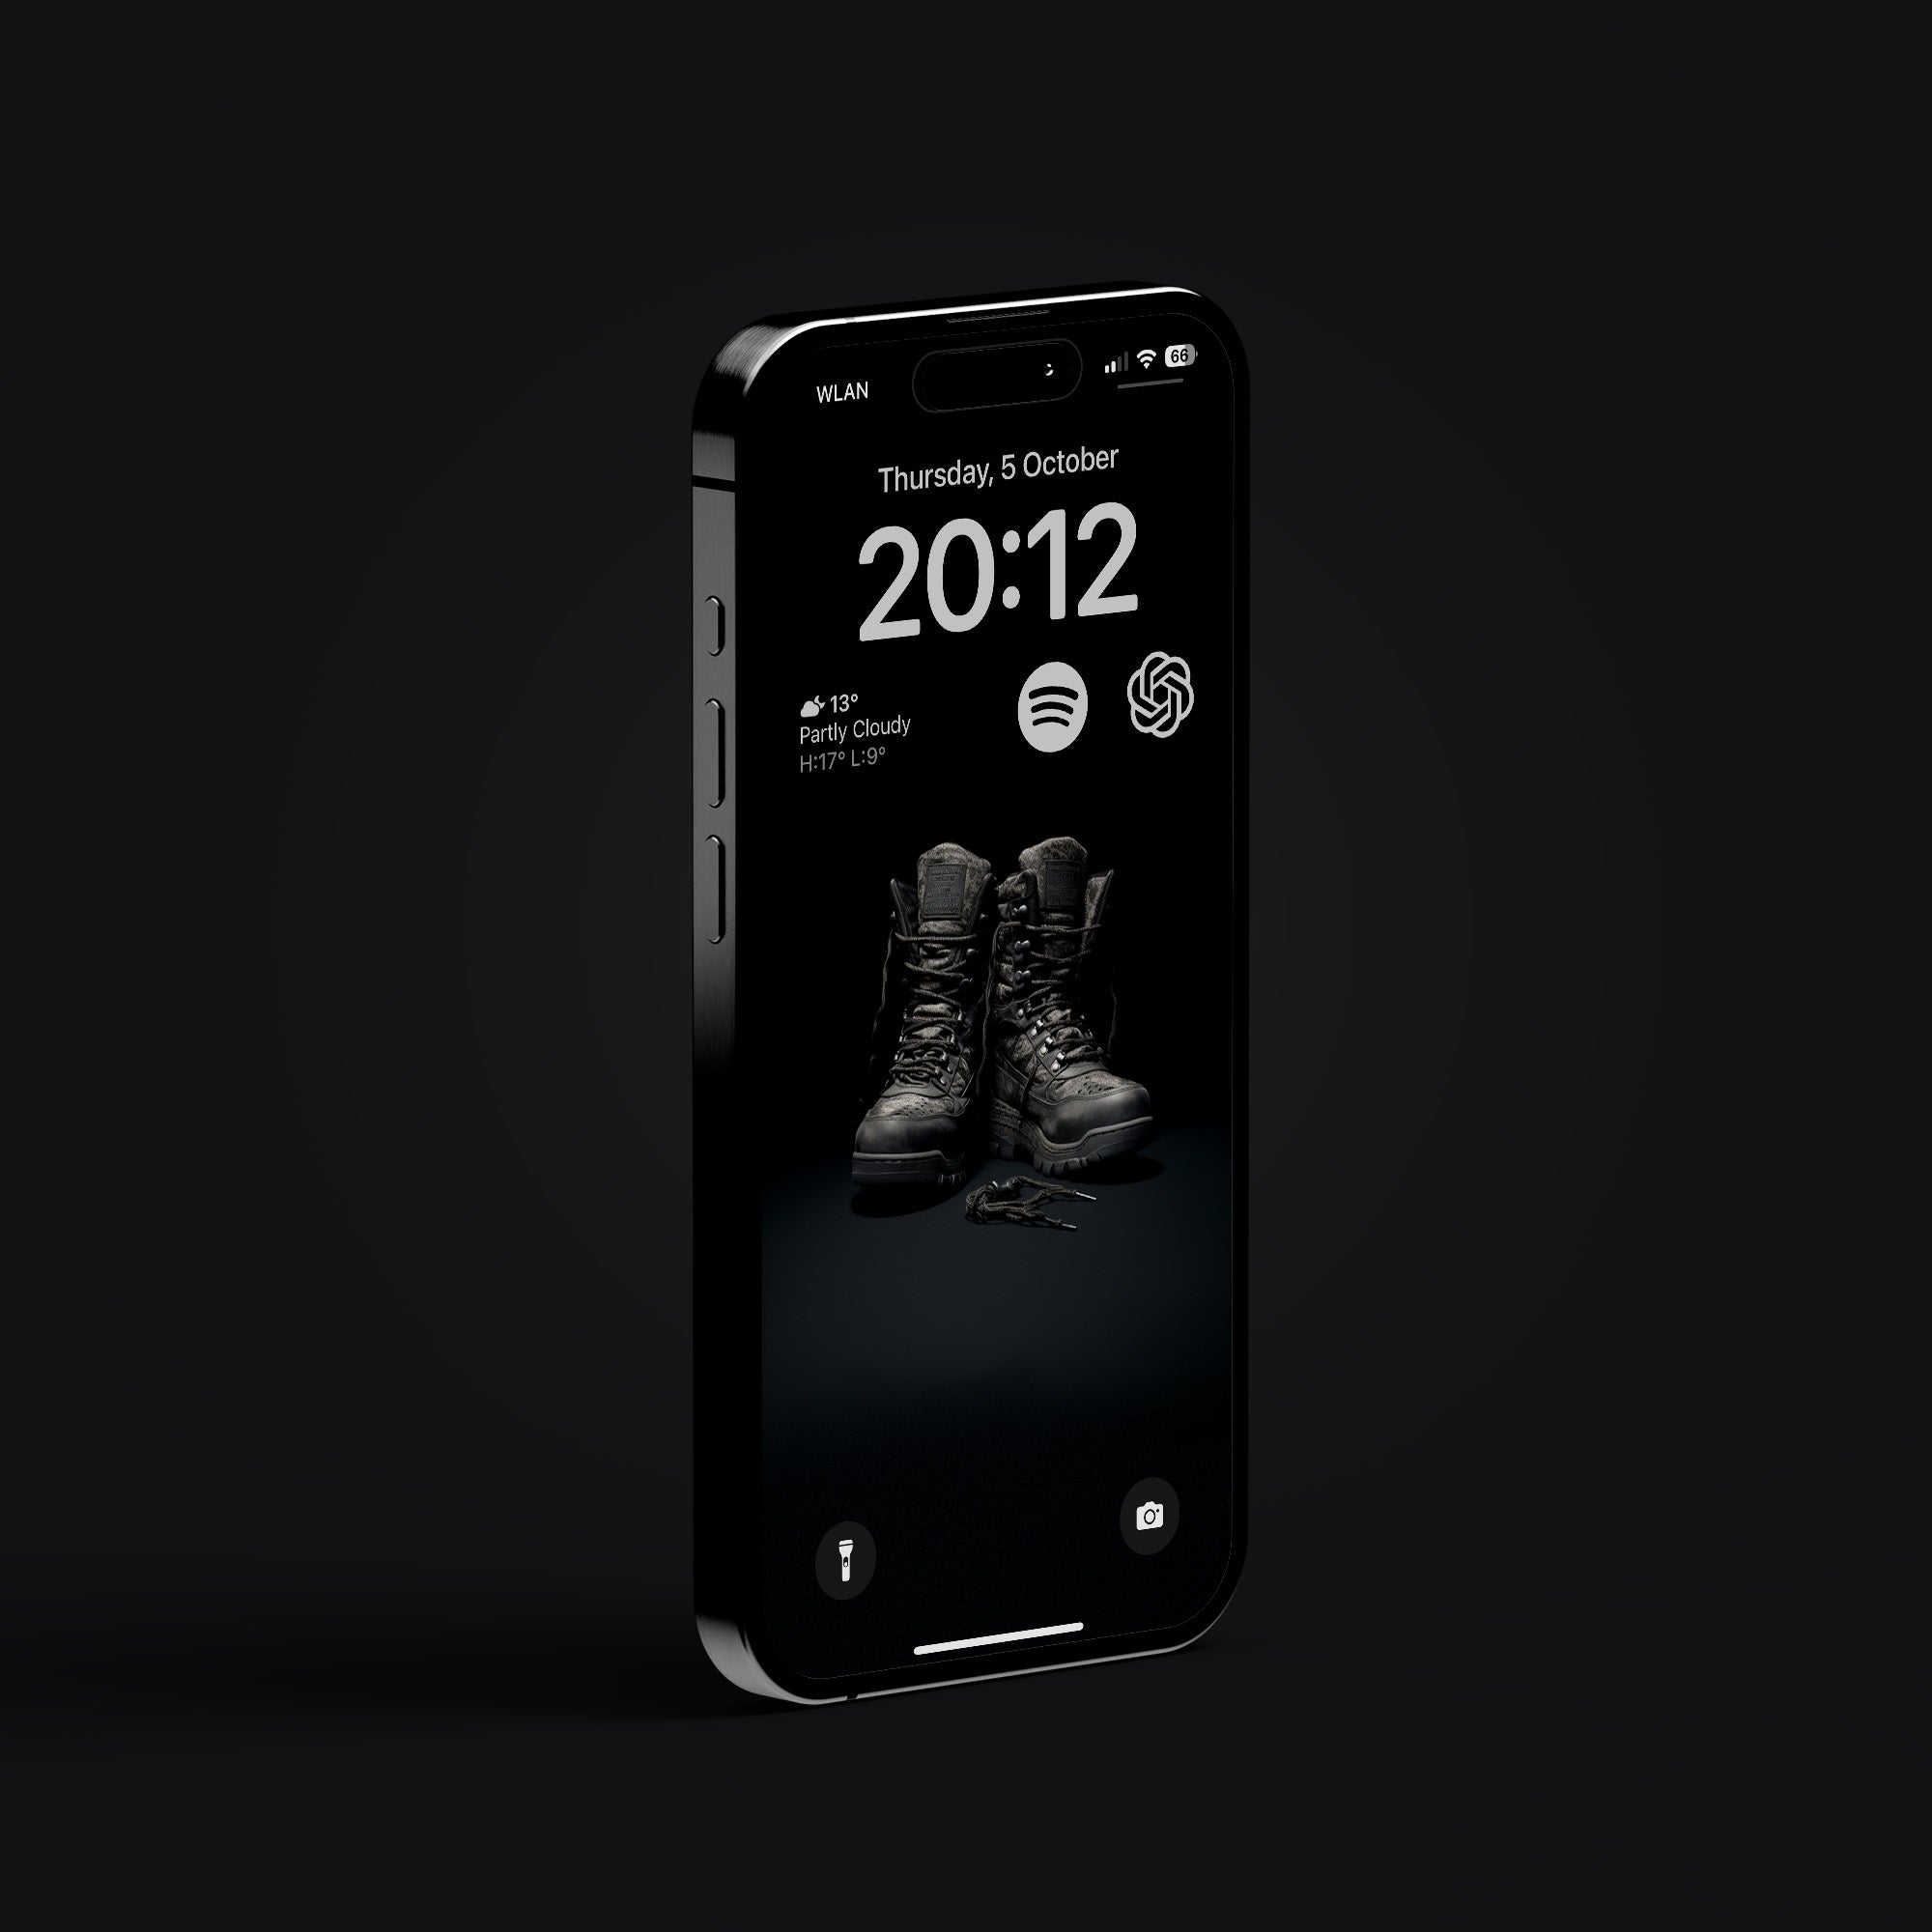 EDC Blackout iPhone Wallpapers for iPhone Pro Max